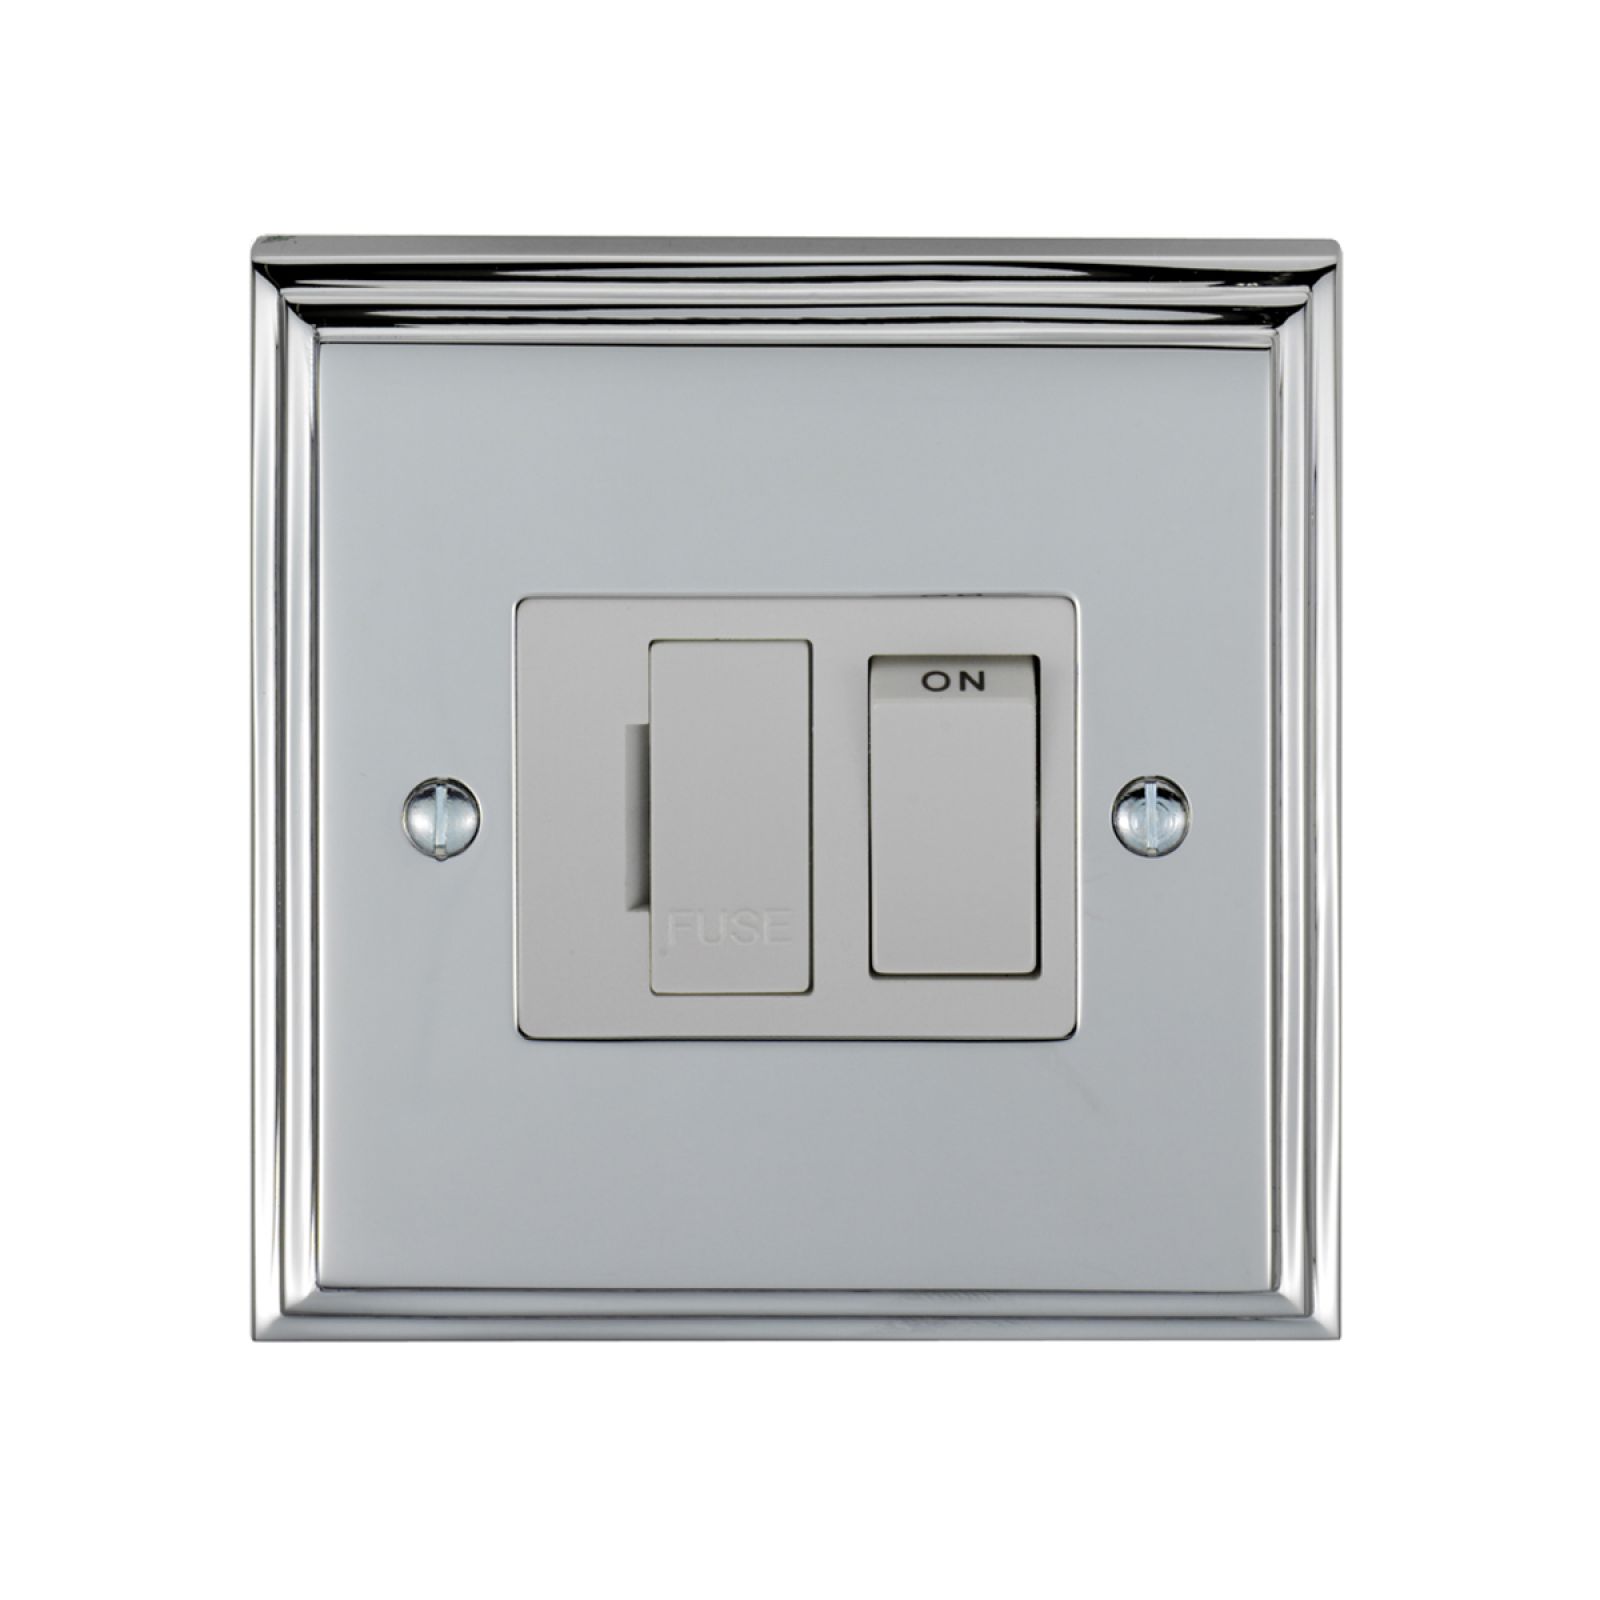 Stepped 13amp Switched Fuse Spur - brass, chrome or satin chrome finishes